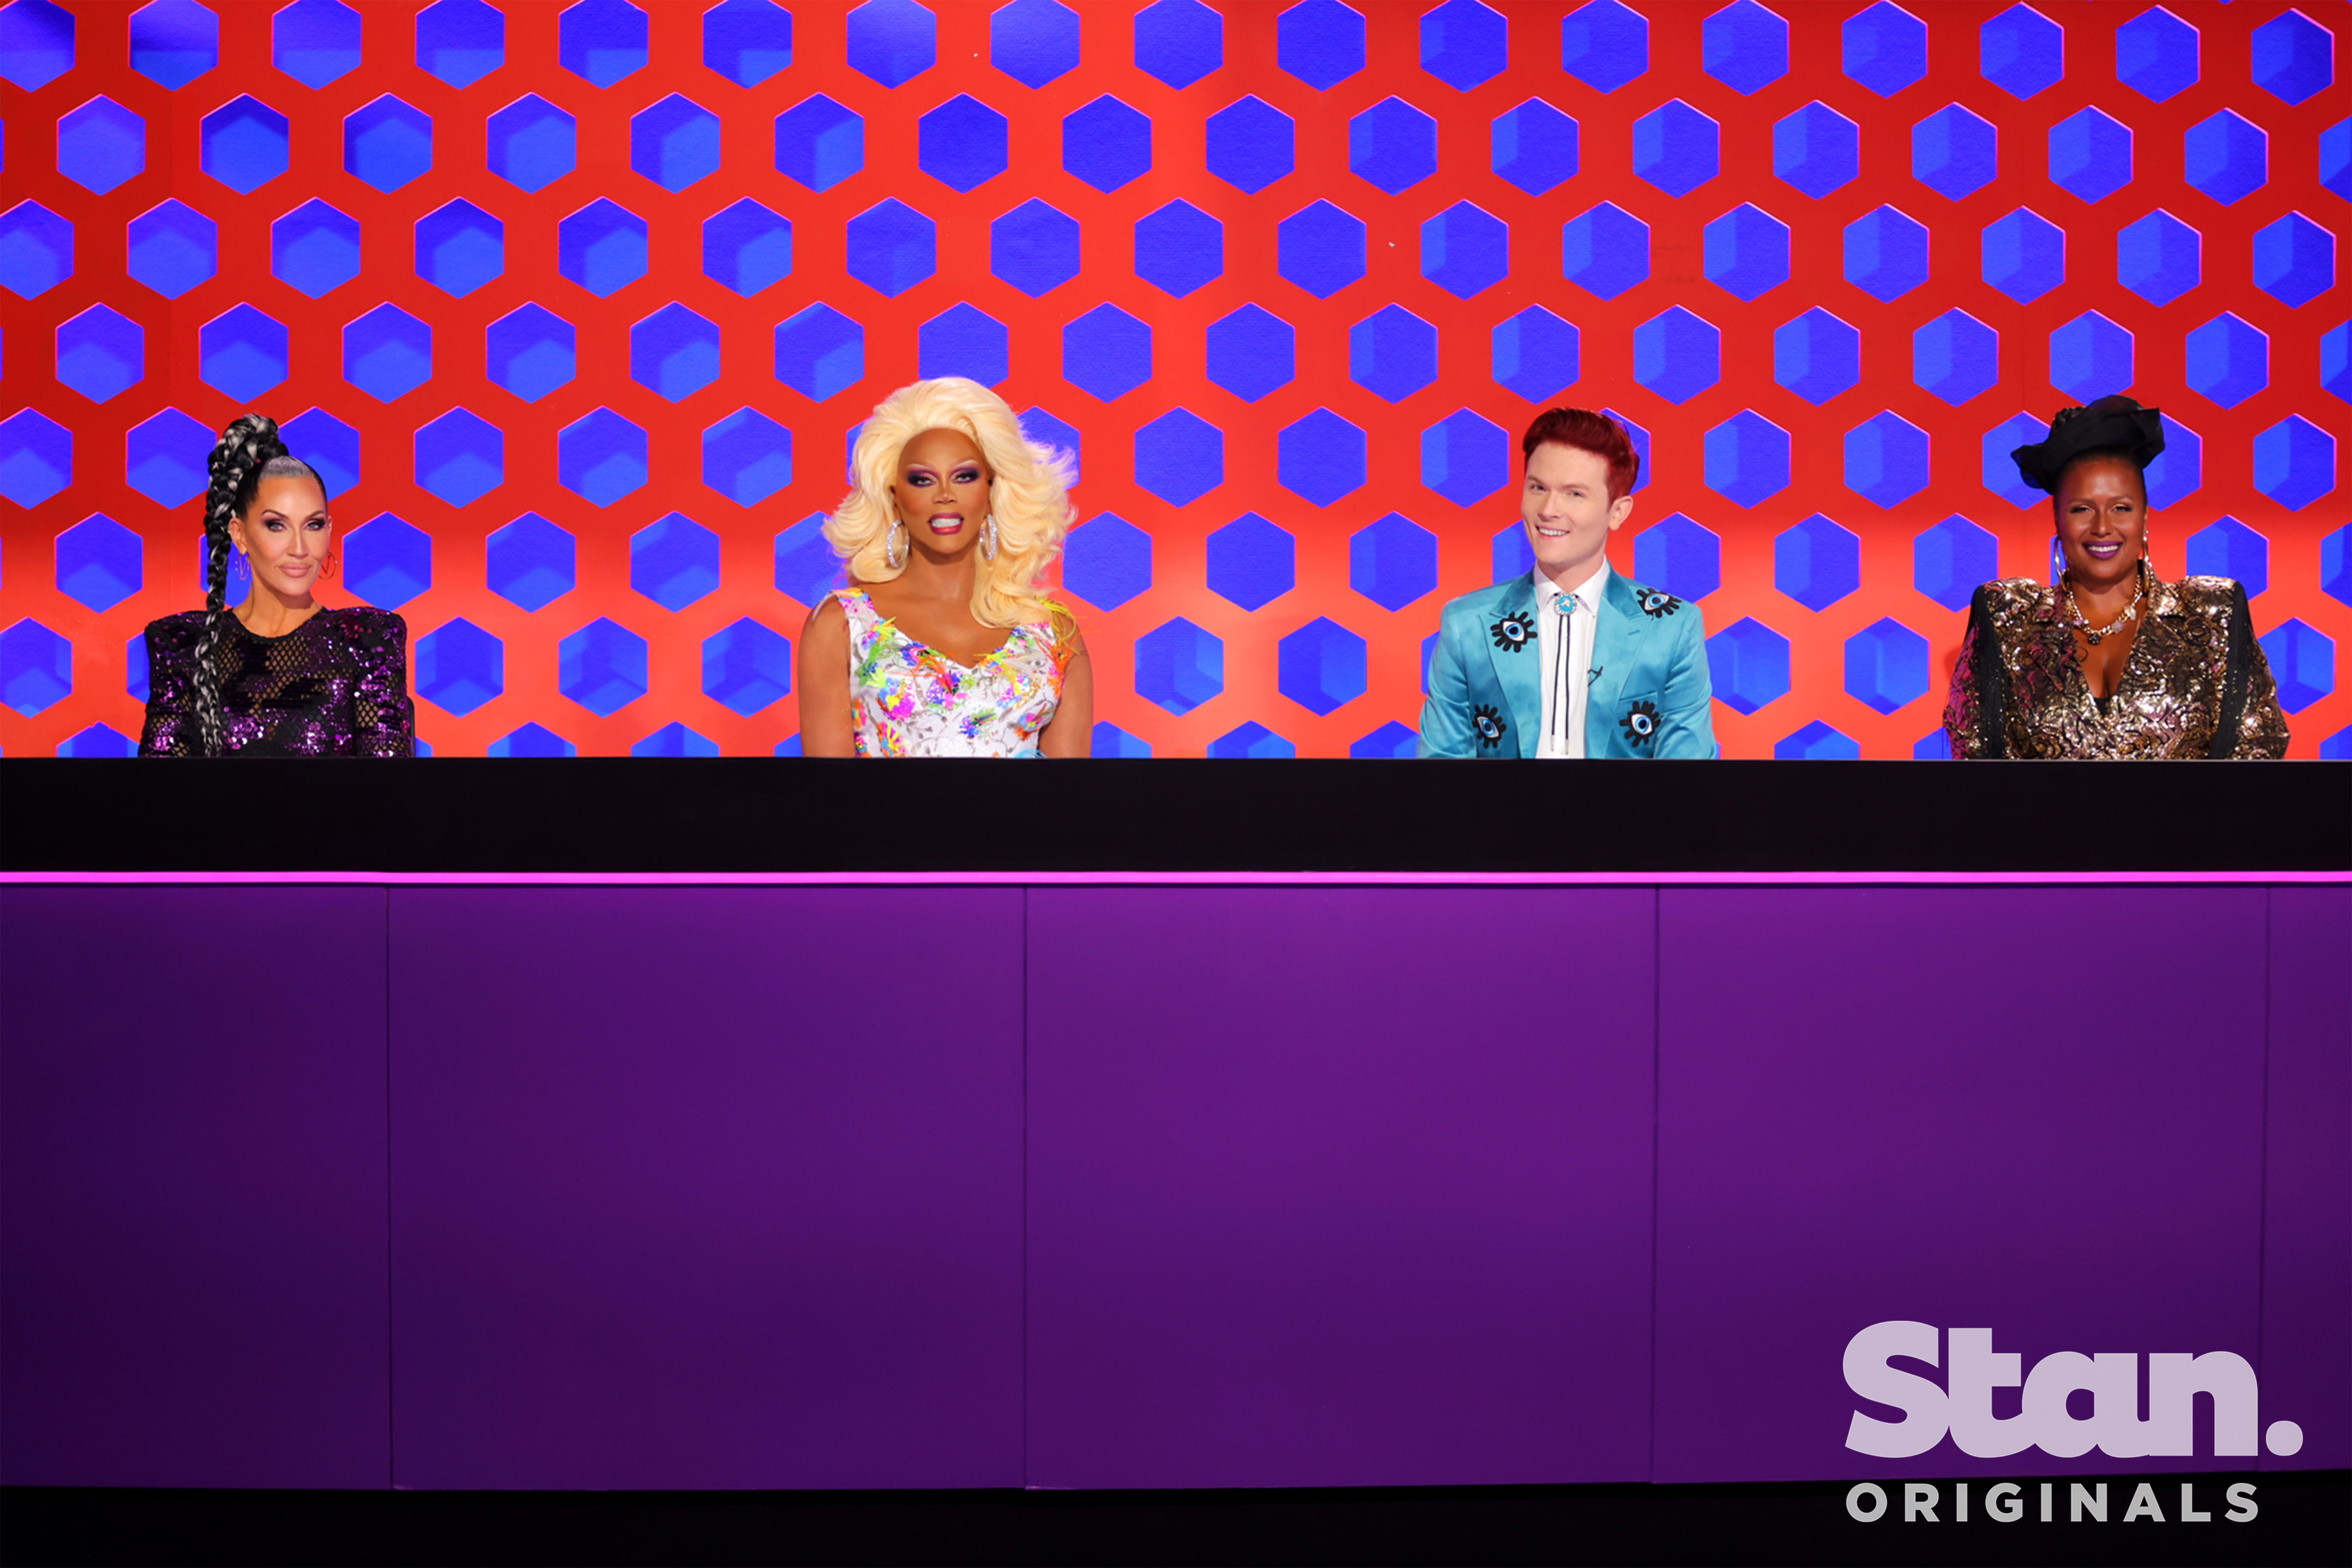 RuPaul's Drag Race Down Under nominated for Best Reality Program
Pictured - Michelle Visage, RuPaul, Rhys Nicholson nominated for Best Comedy Performer, Deva Mahal